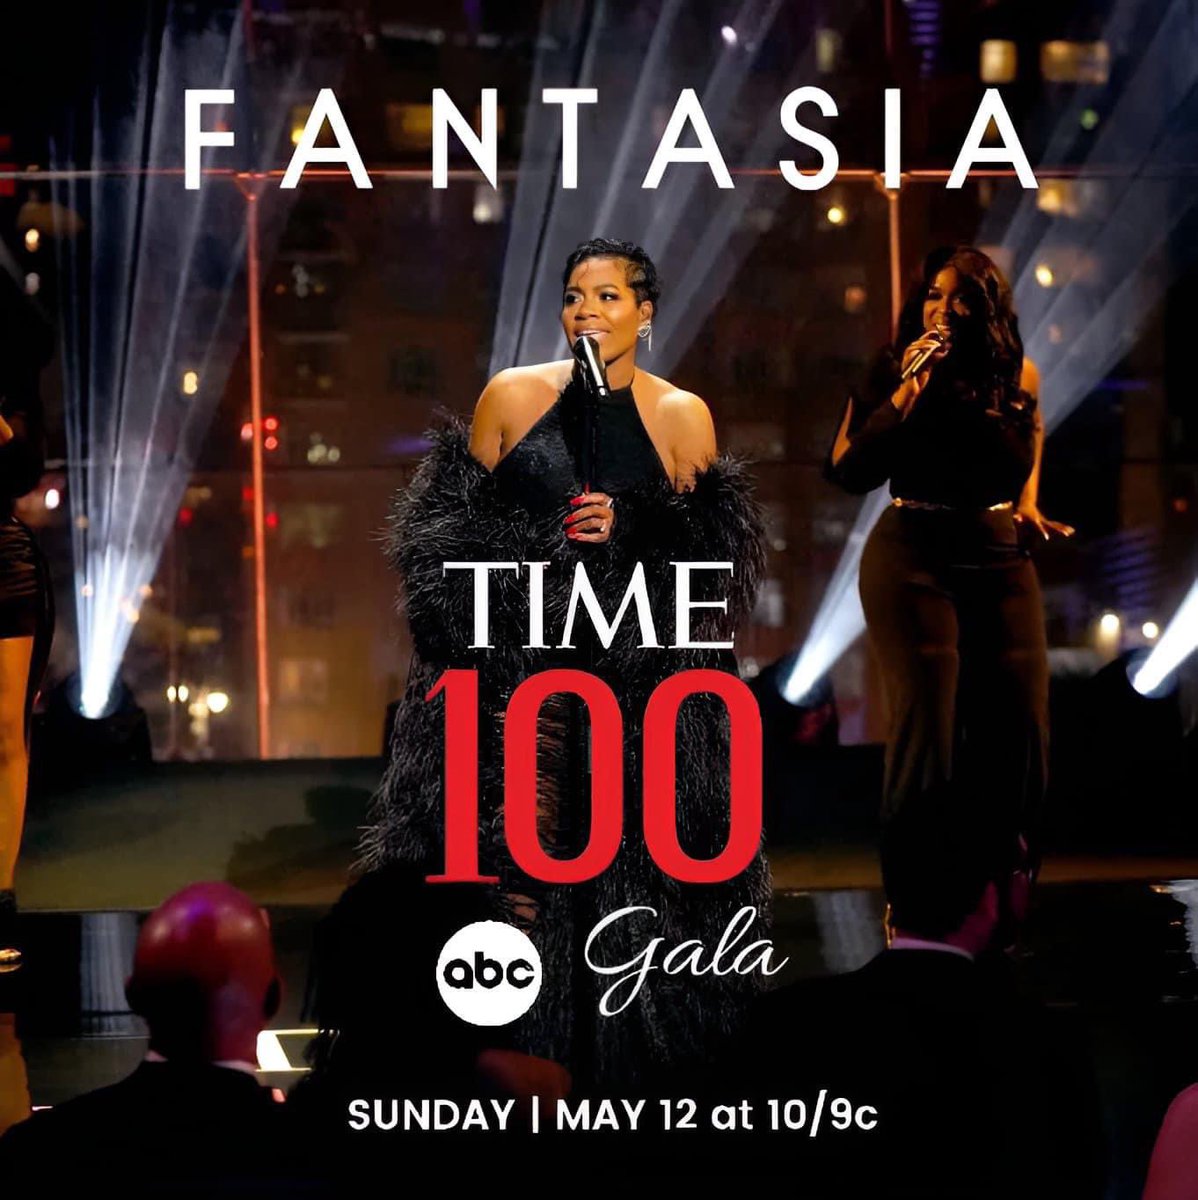 Don’t miss Fantasia’s EPIC performance of some of her hits at the 2024 #Time100 gala! 

Watch it live on @ABC next Sunday May 12th at 10/9 central. #RockSoul ✨👑